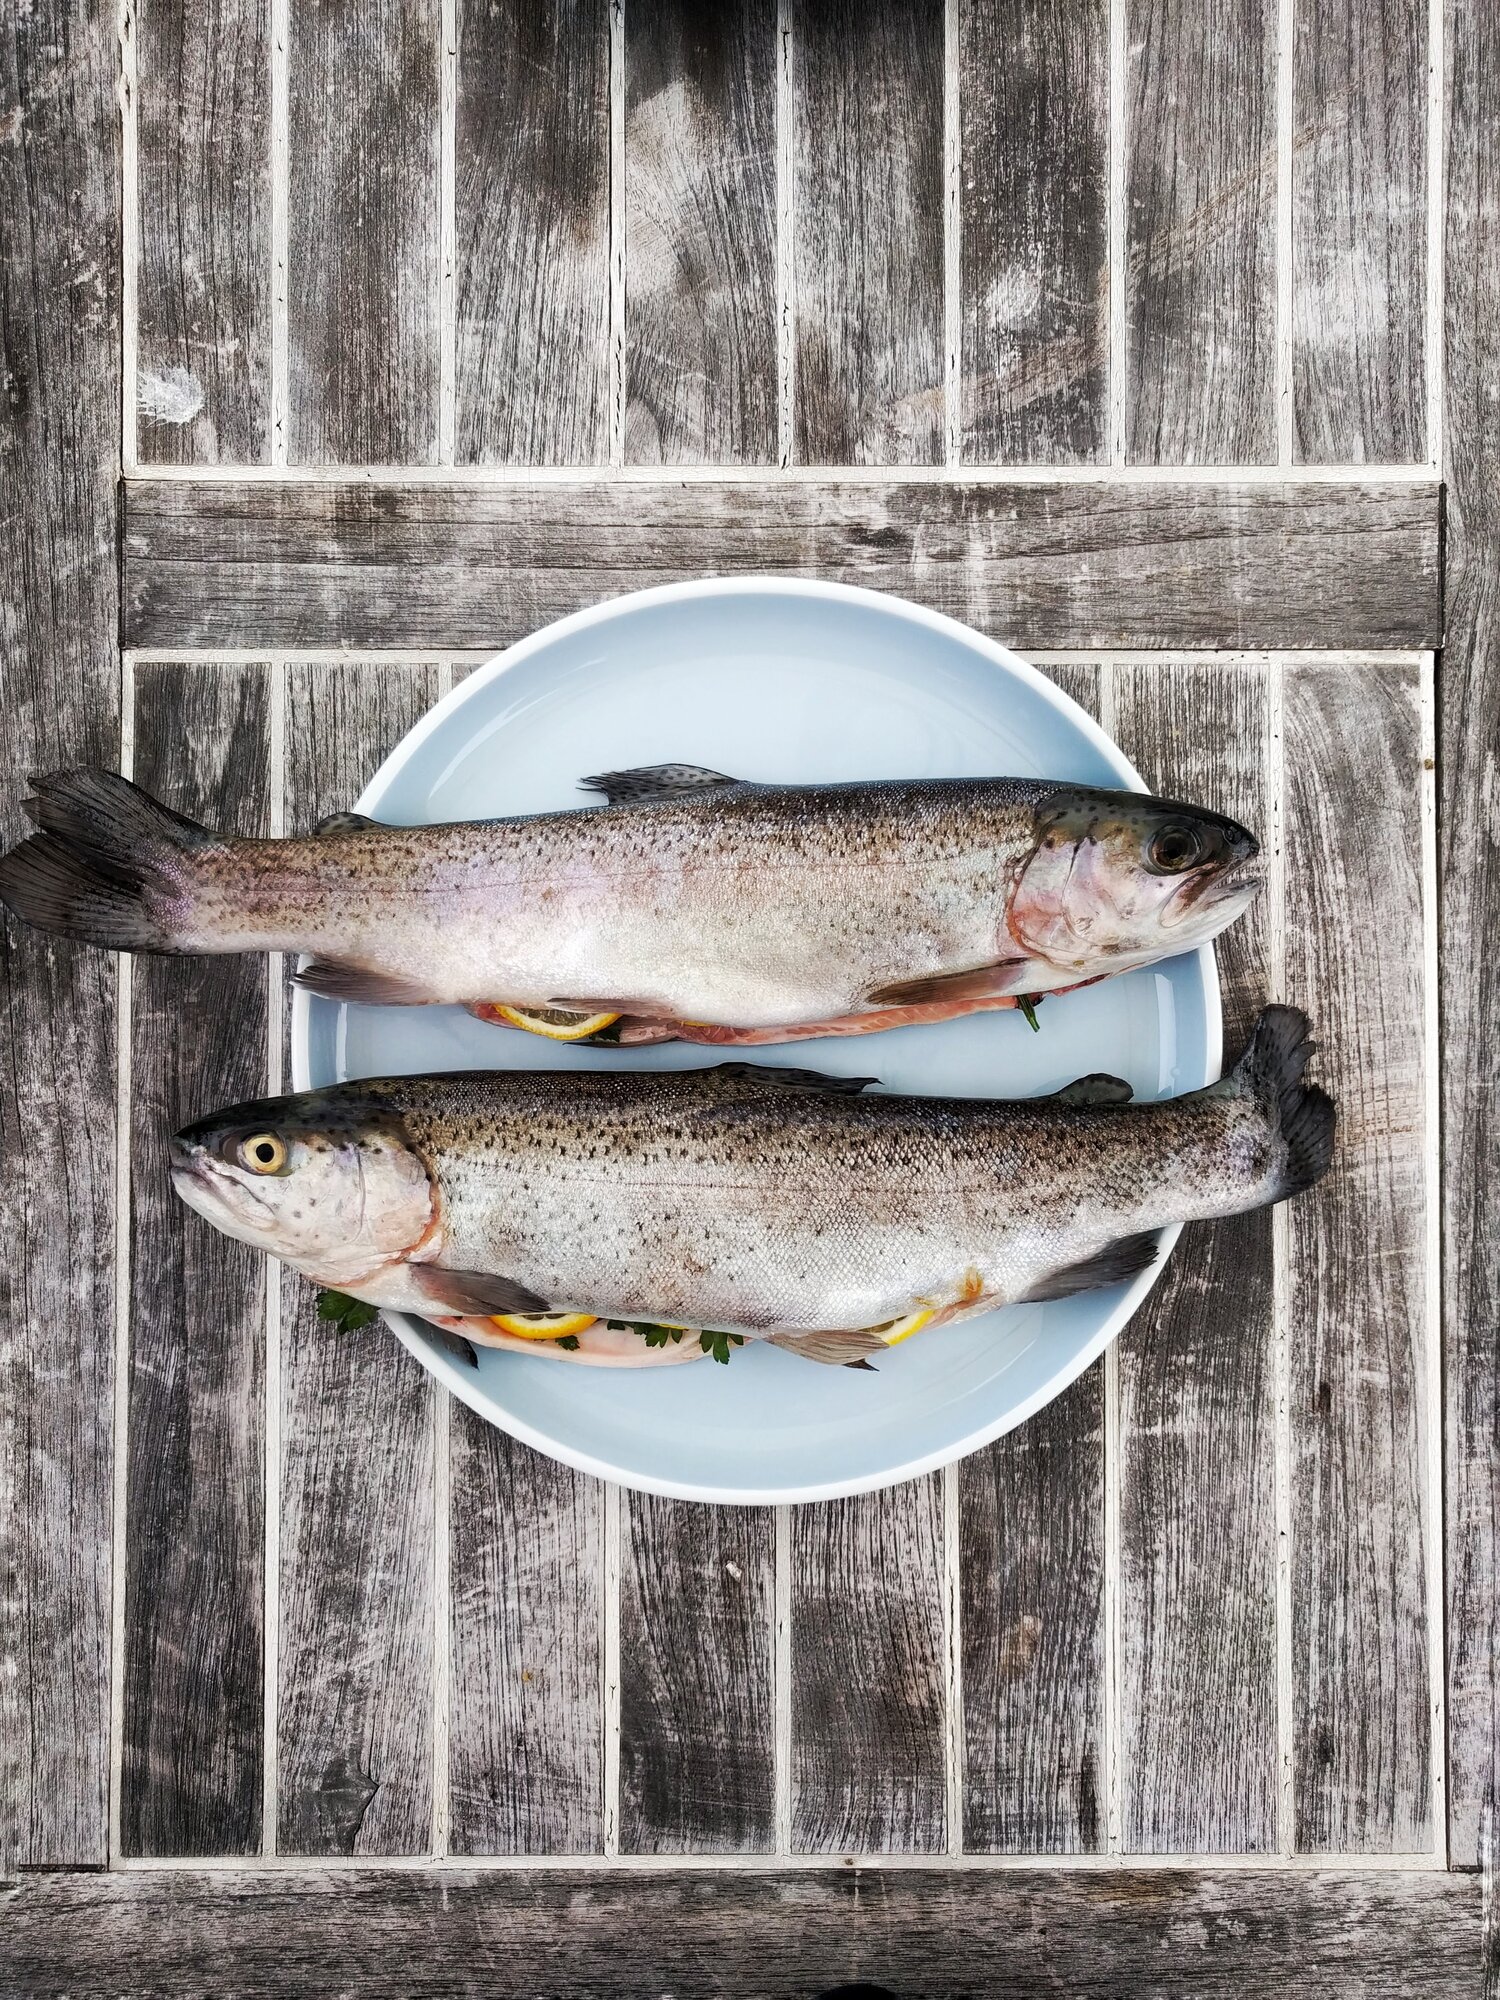 How to Shop for Healthy Seafood // Four Wellness Co.